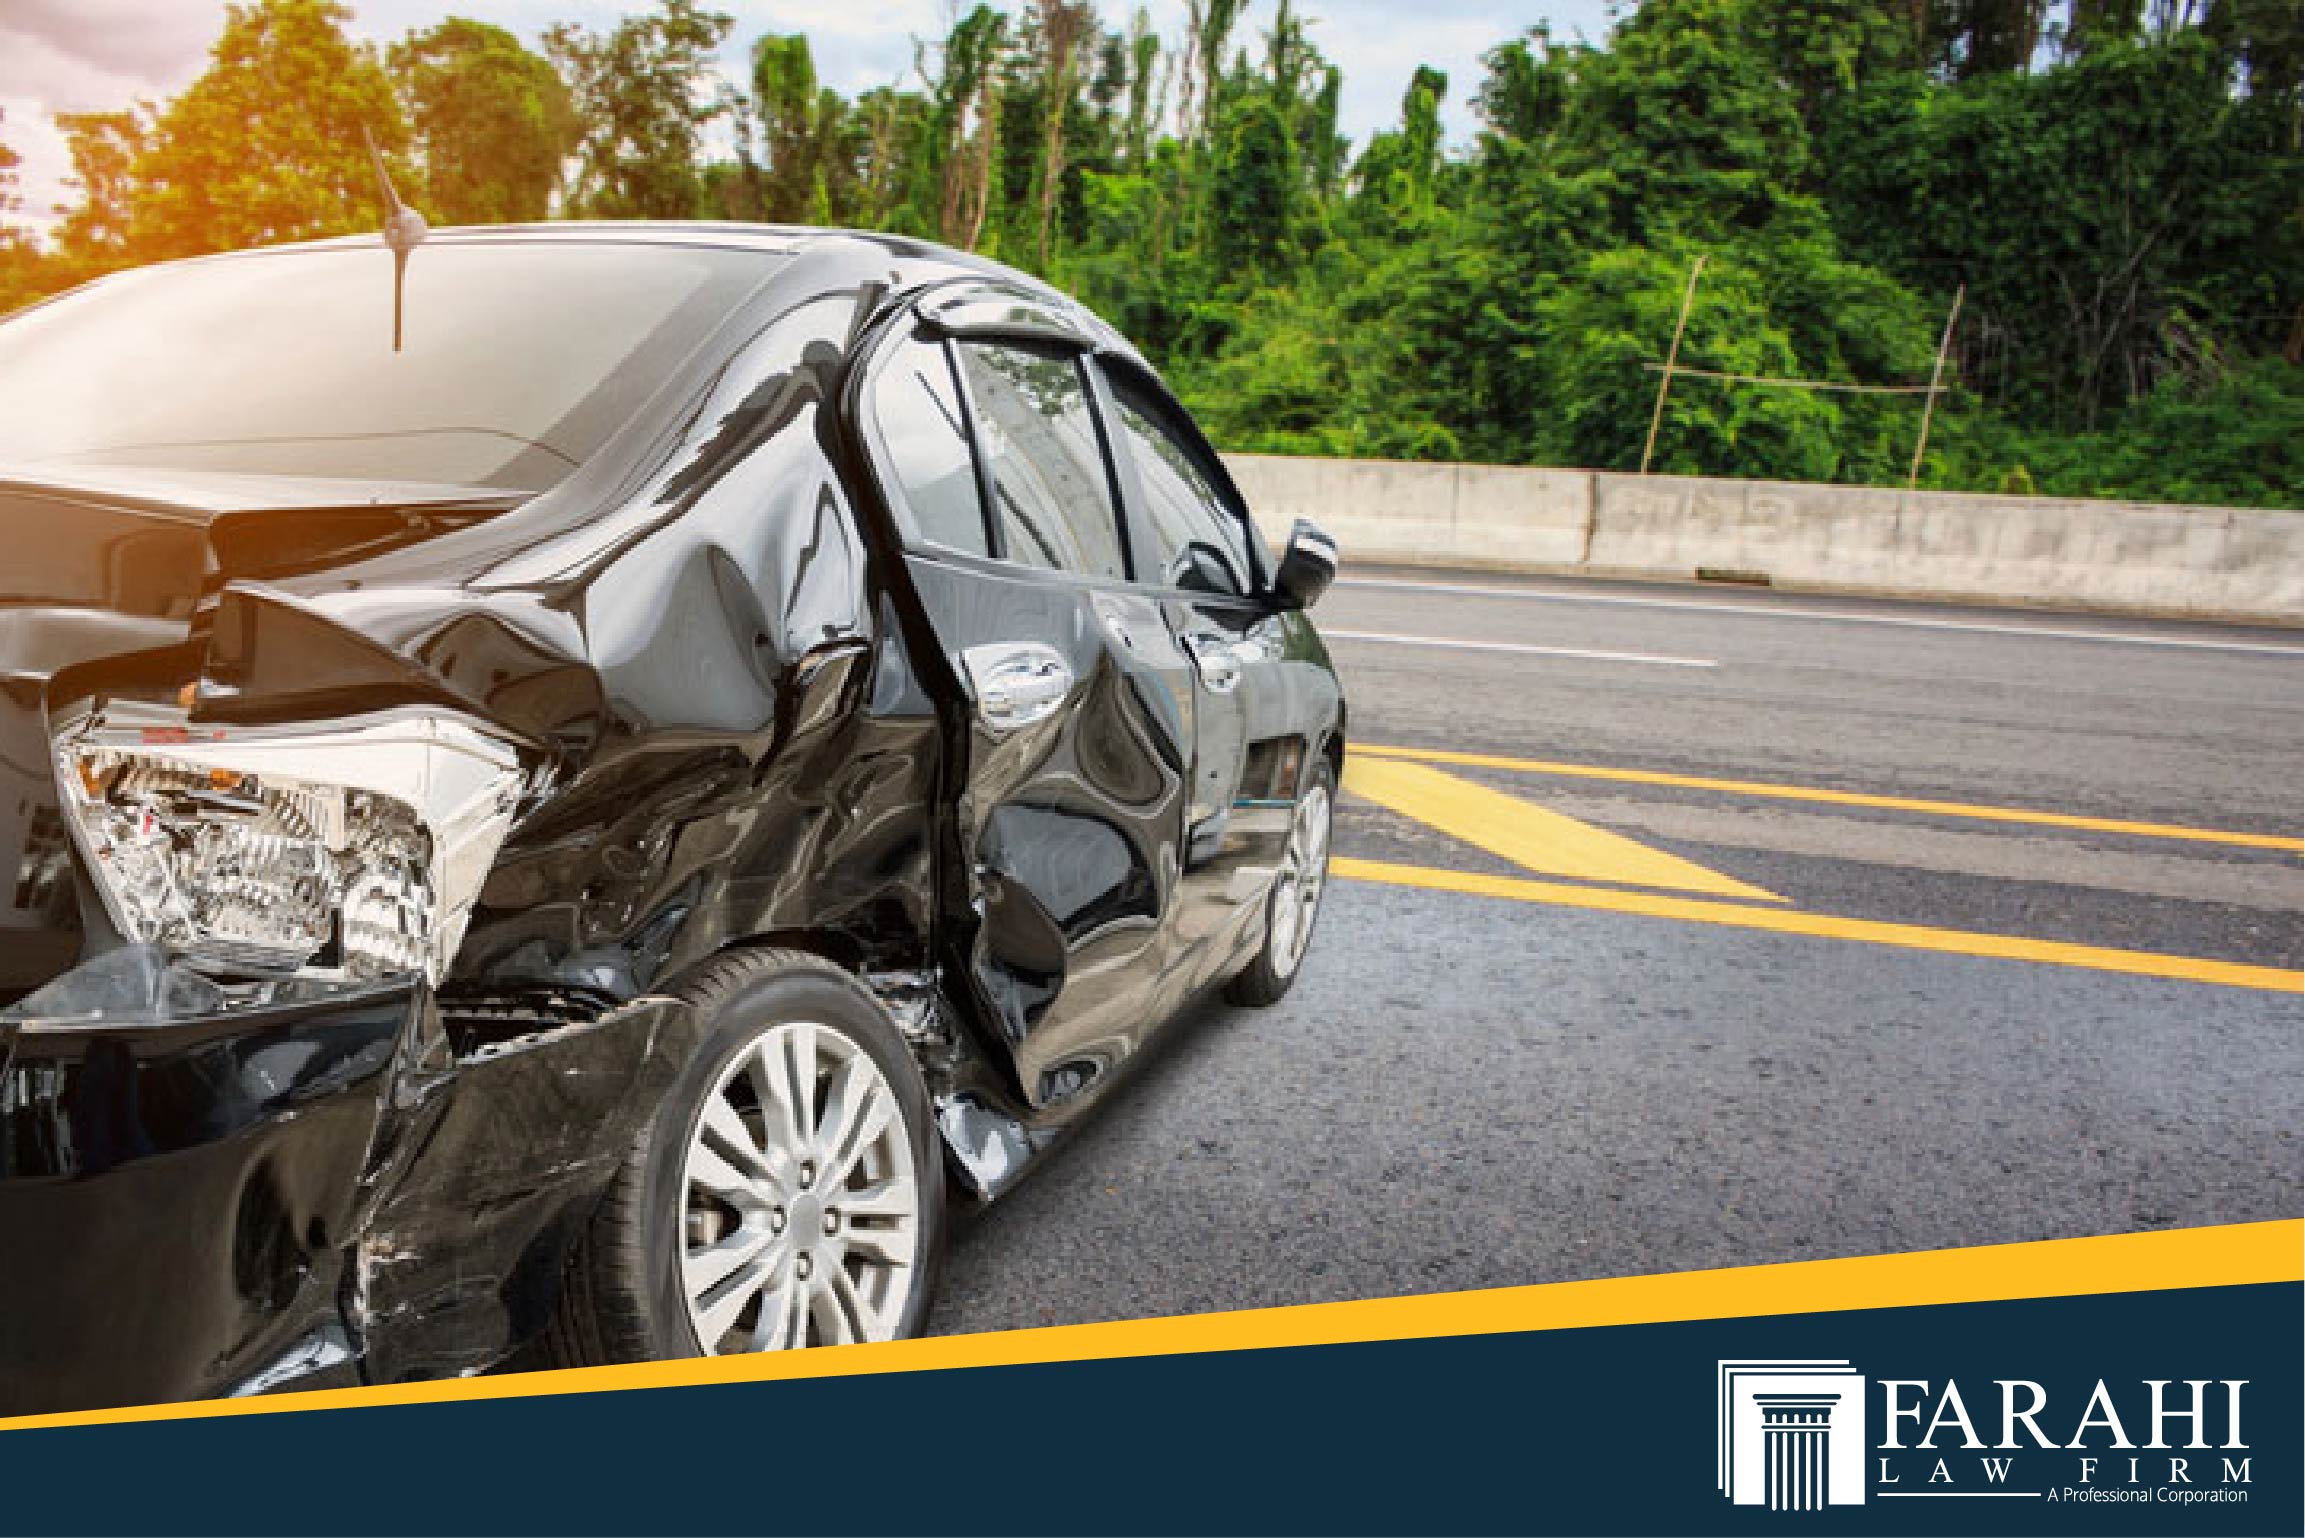 How Are Car Accident Settlements Calculated?